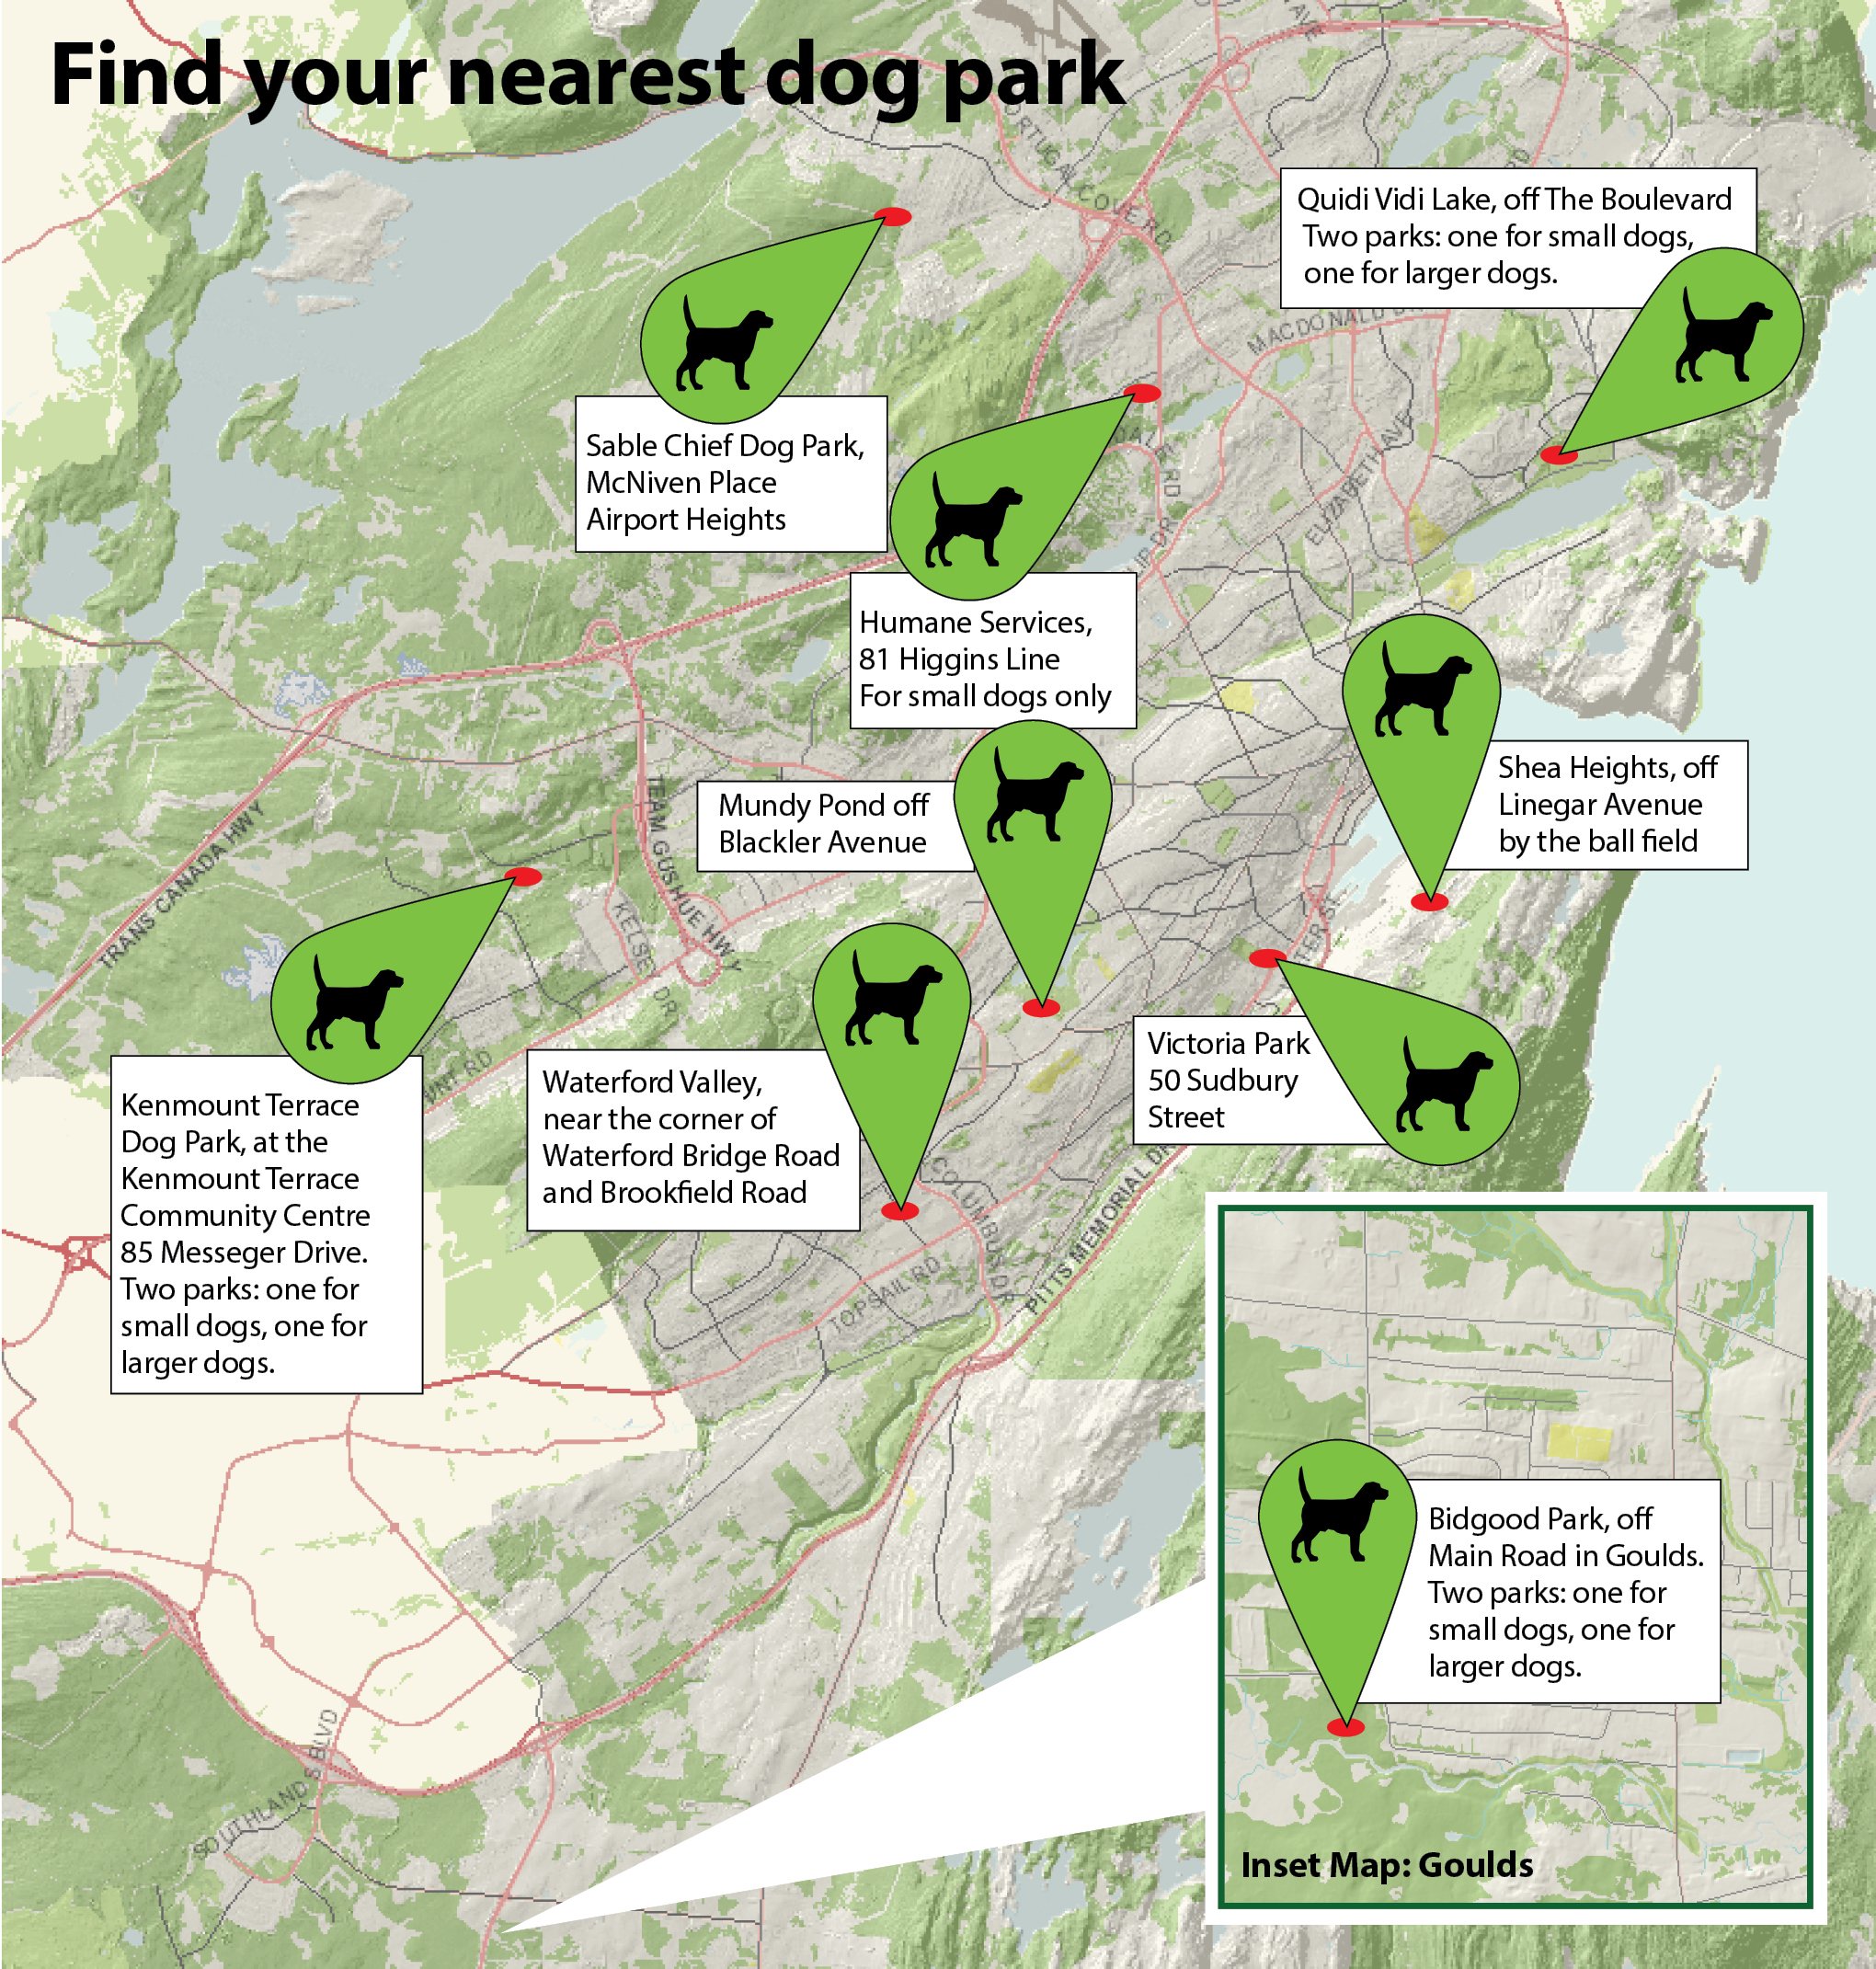 A map of St. John's indicating the locations of the nine dog parks located in the city